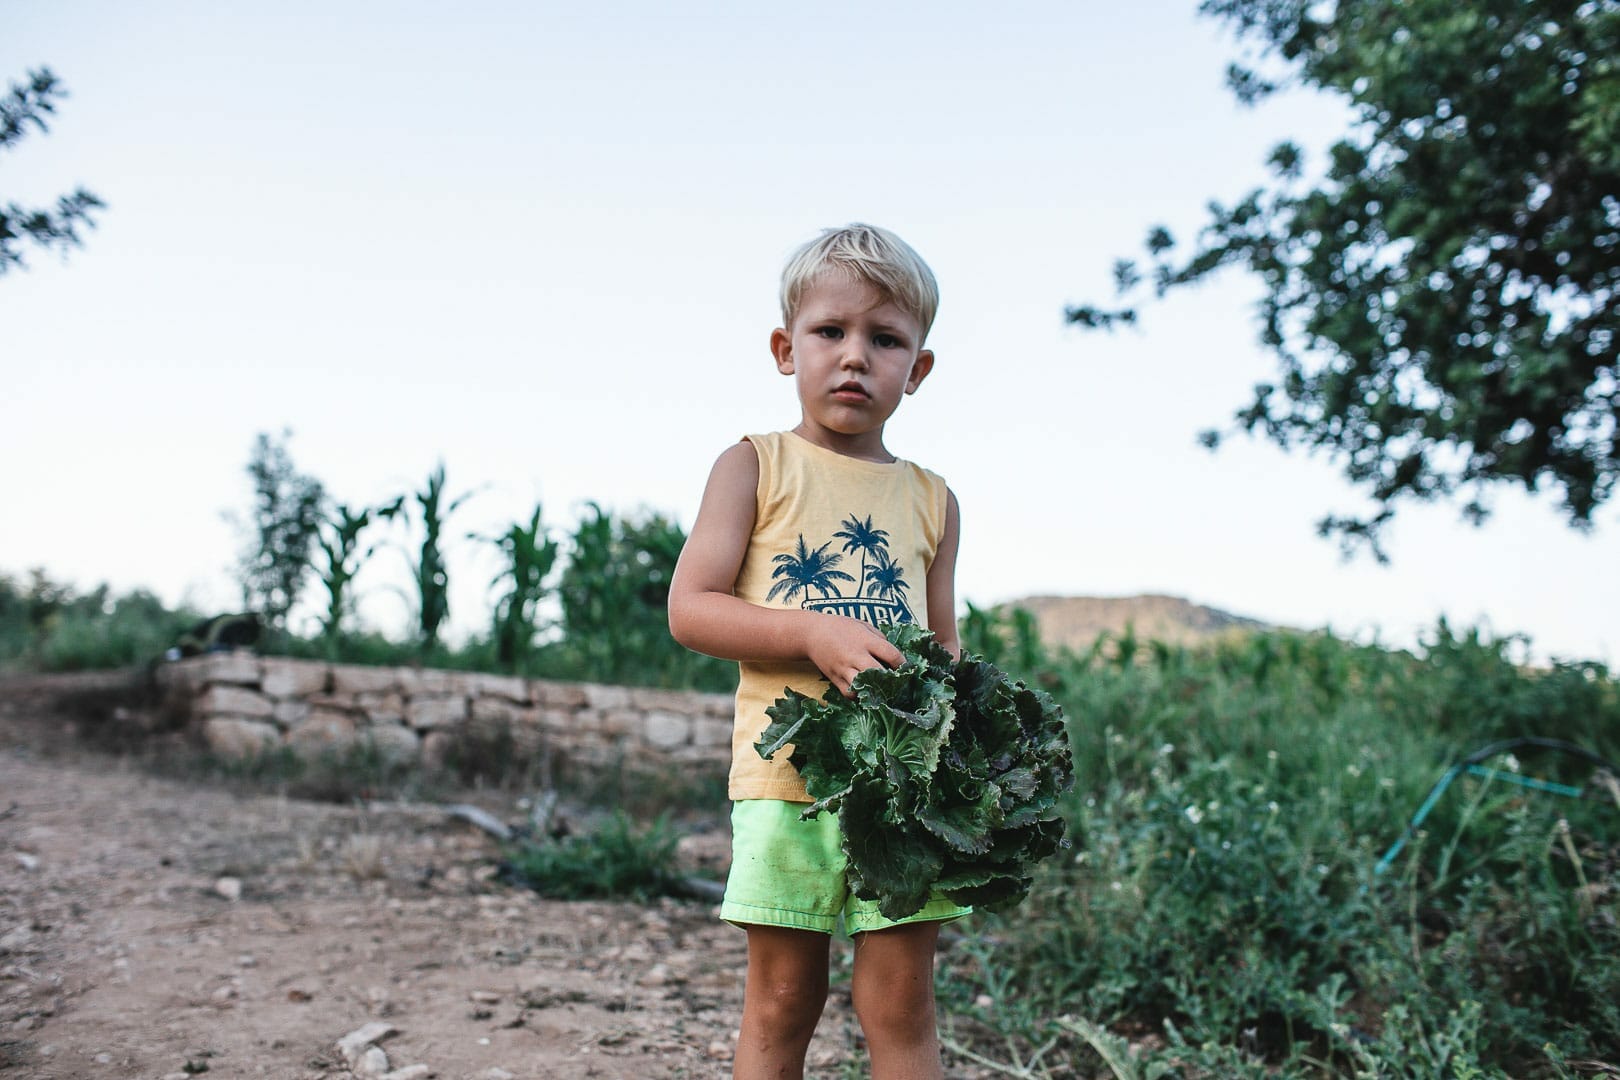 Snapshot of a boy holding a lettuce walking around the harvested field